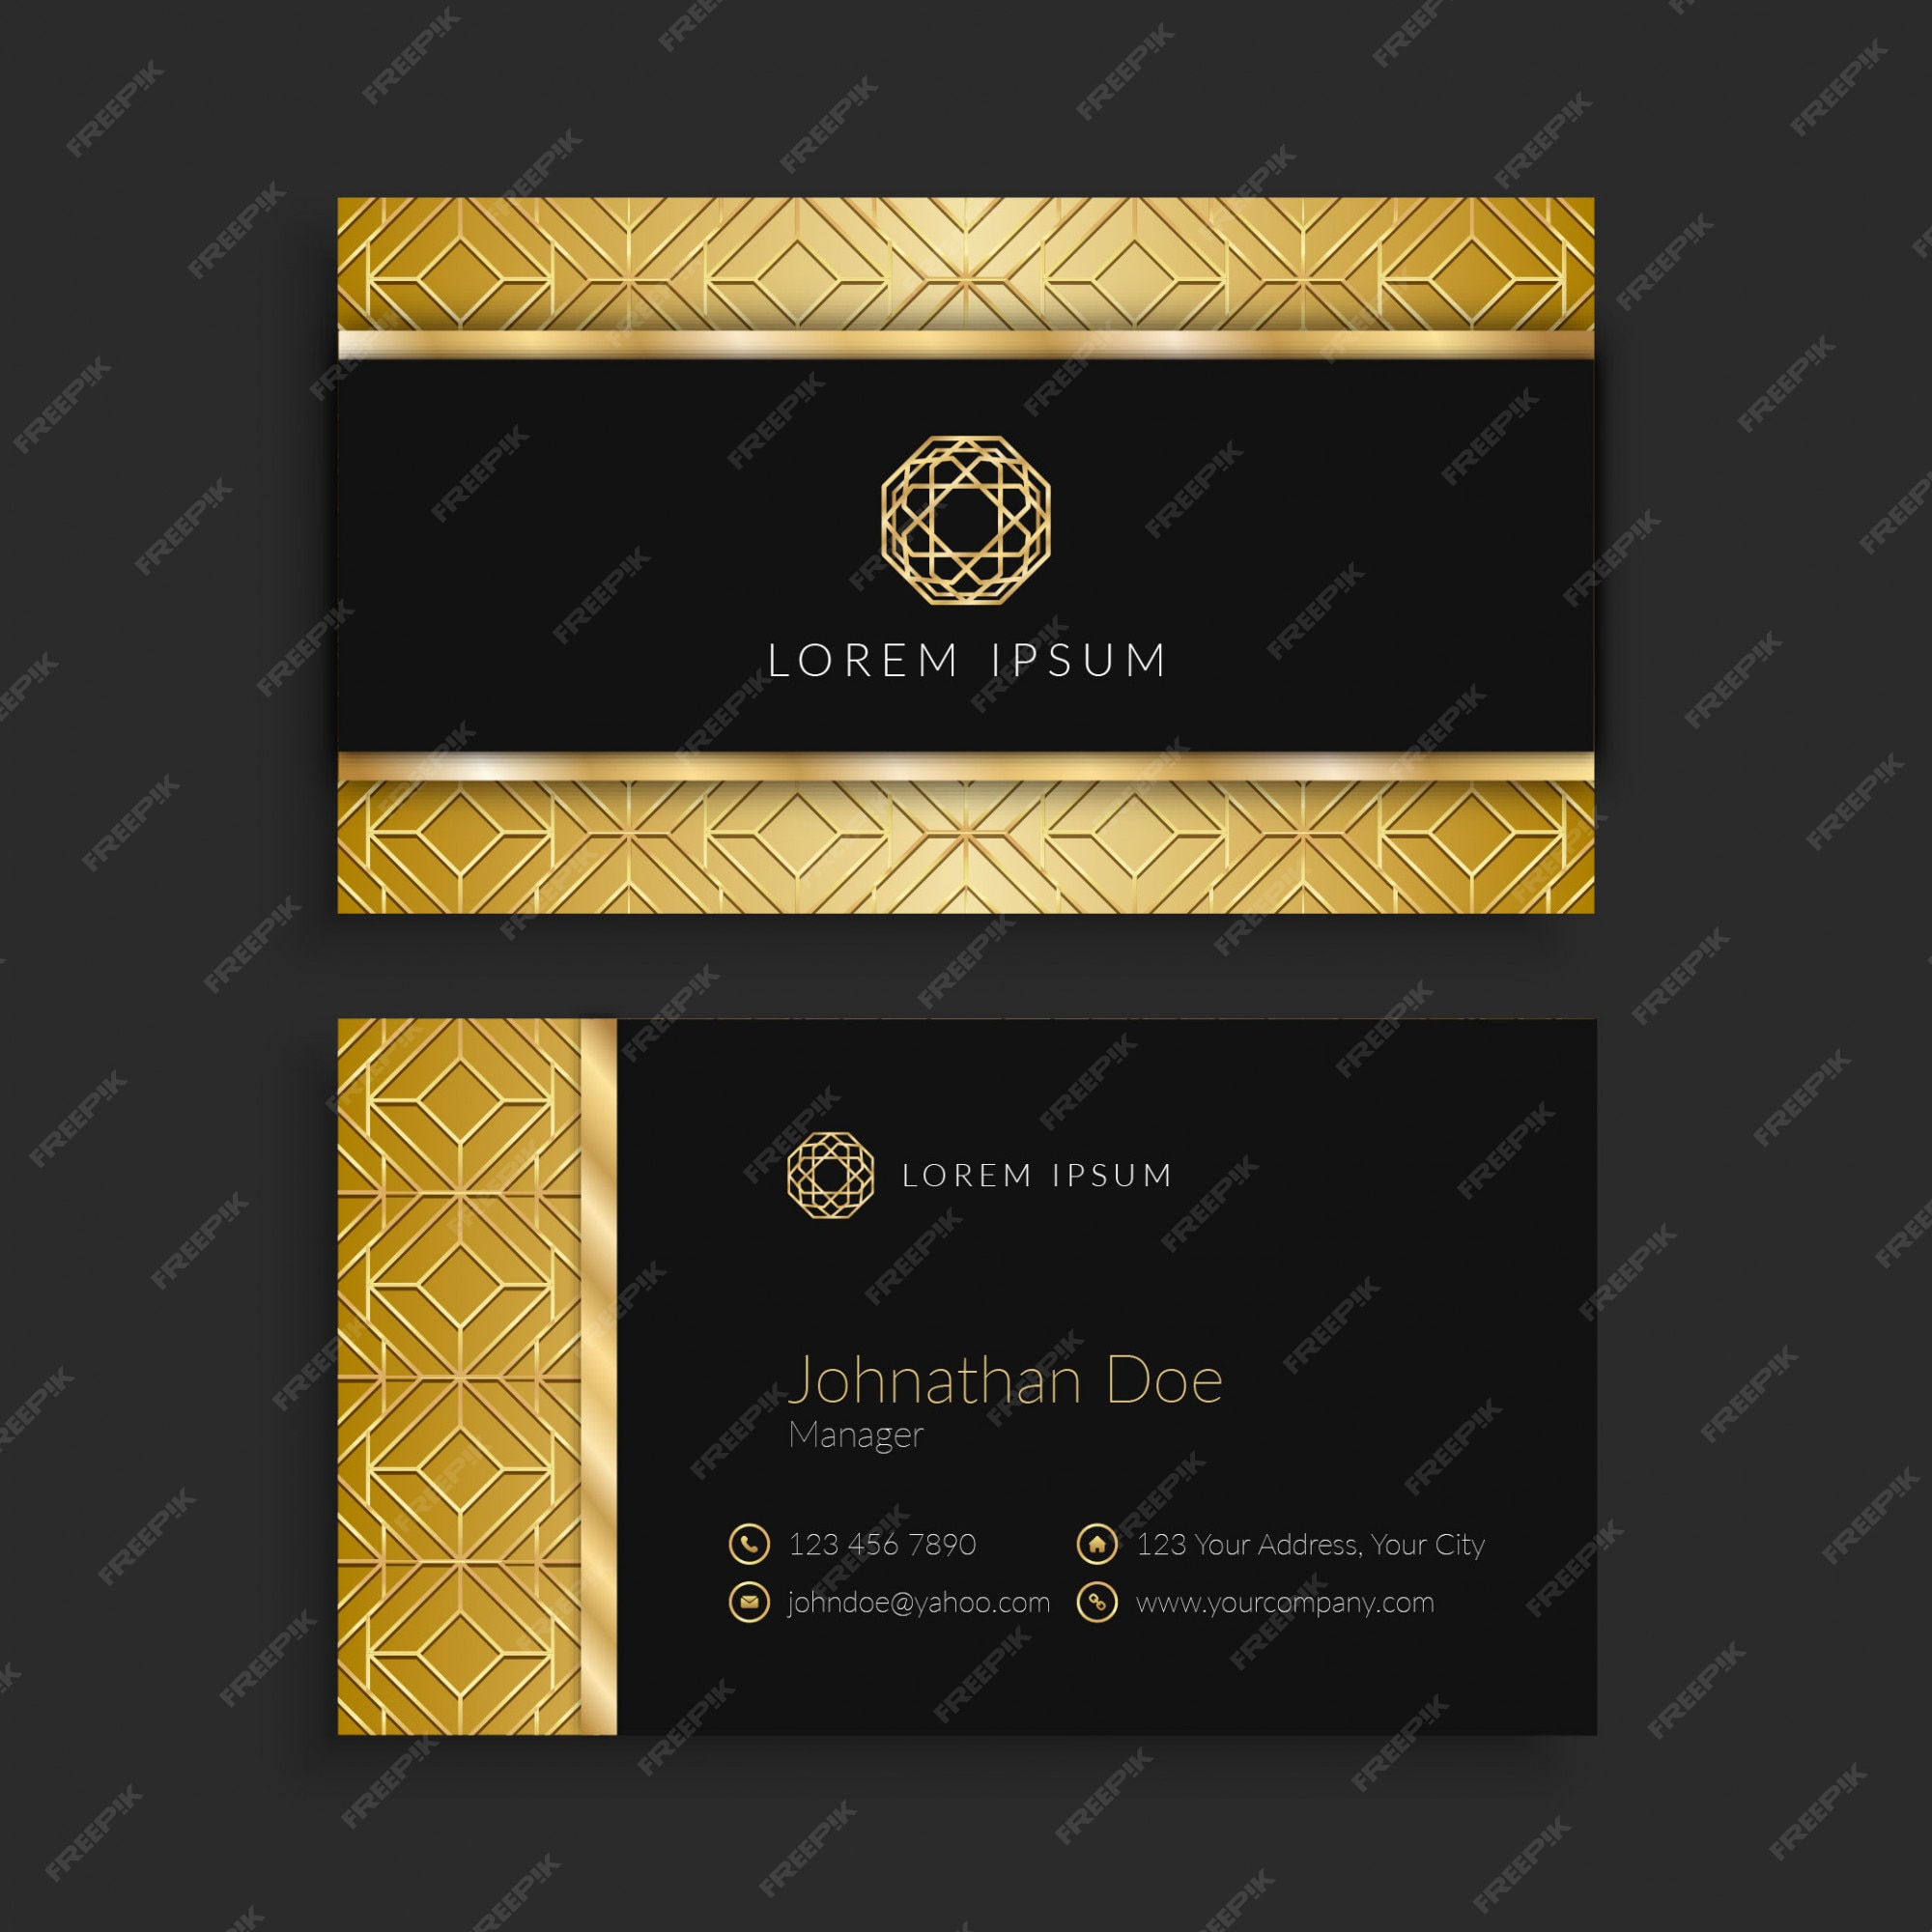 Premium Vector | Gold luxury business card template